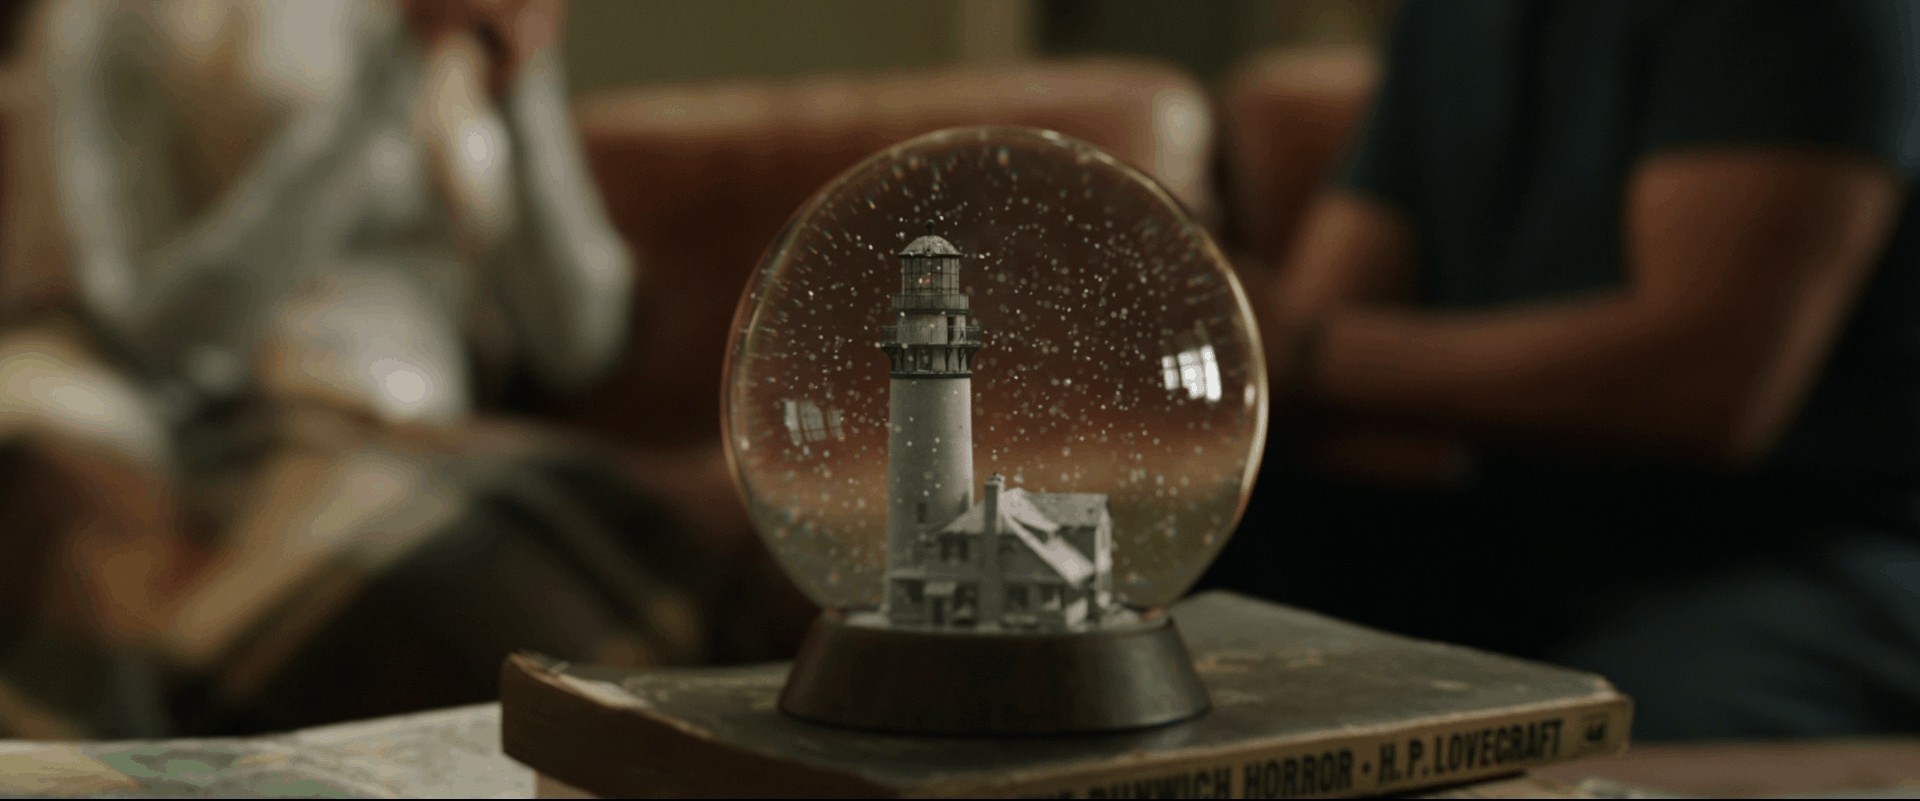 Snow globe close up from the film Aquaman. Notice which books it's sitting on top of.